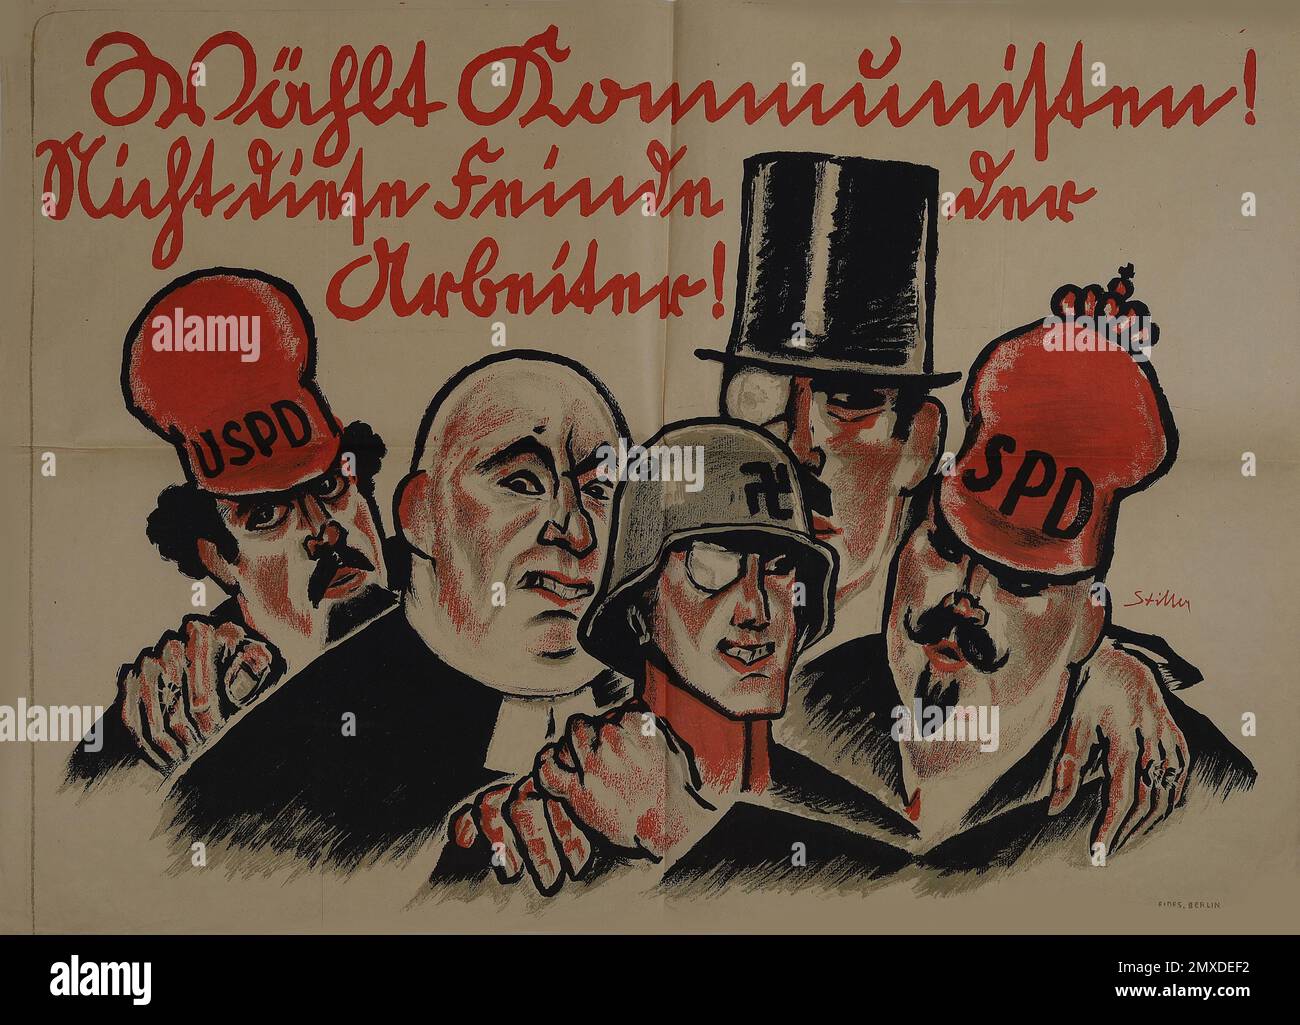 Vote for Communists! Not these enemies of the workers!. Museum: PRIVATE COLLECTION. Author: ALFRED STILLER. Stock Photo